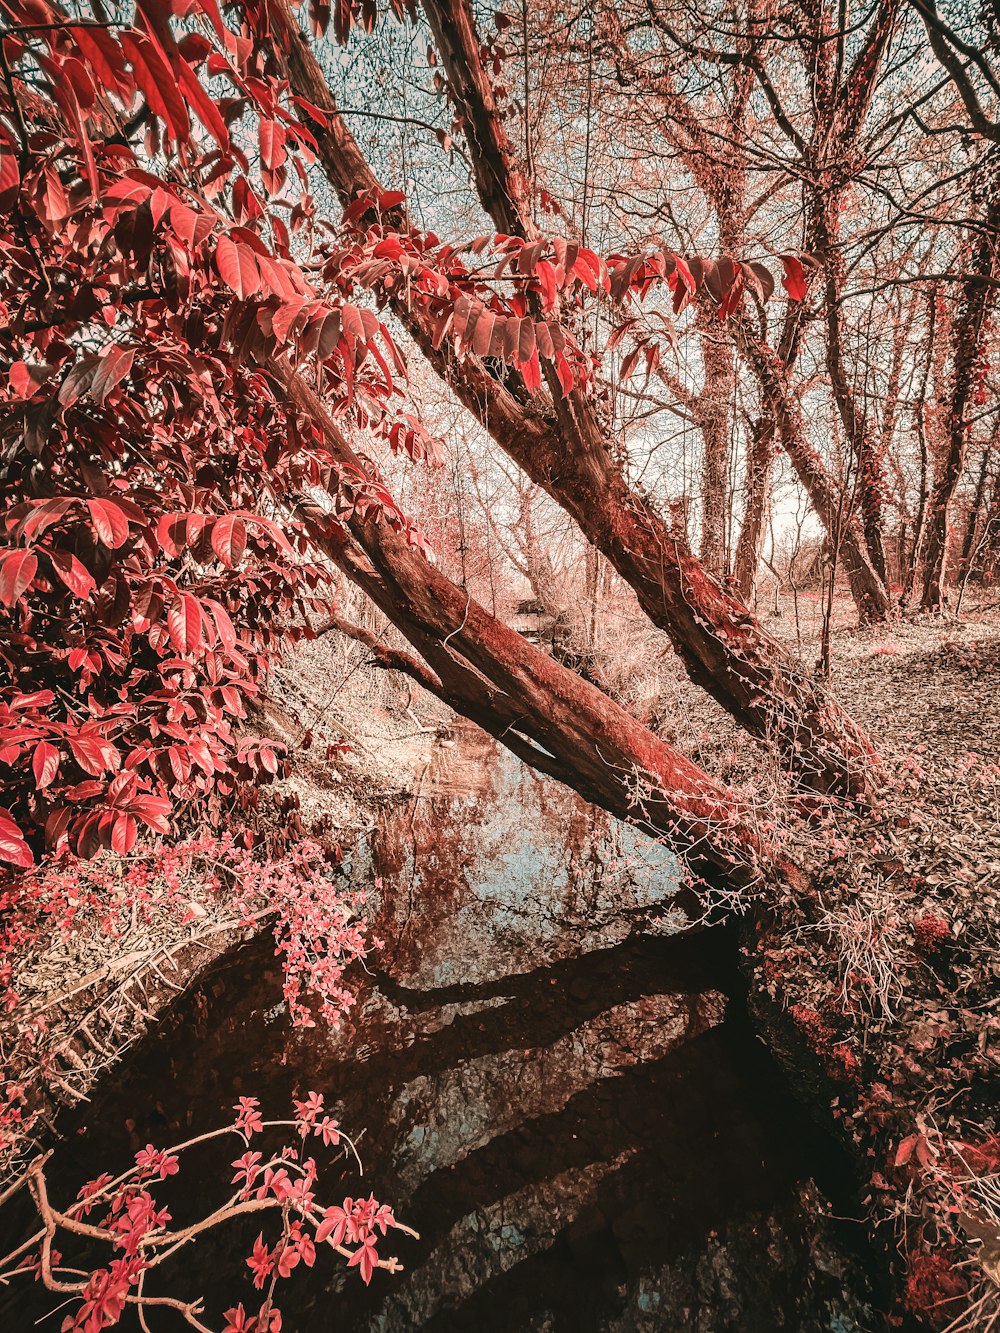 a stream running through a forest filled with red leaves